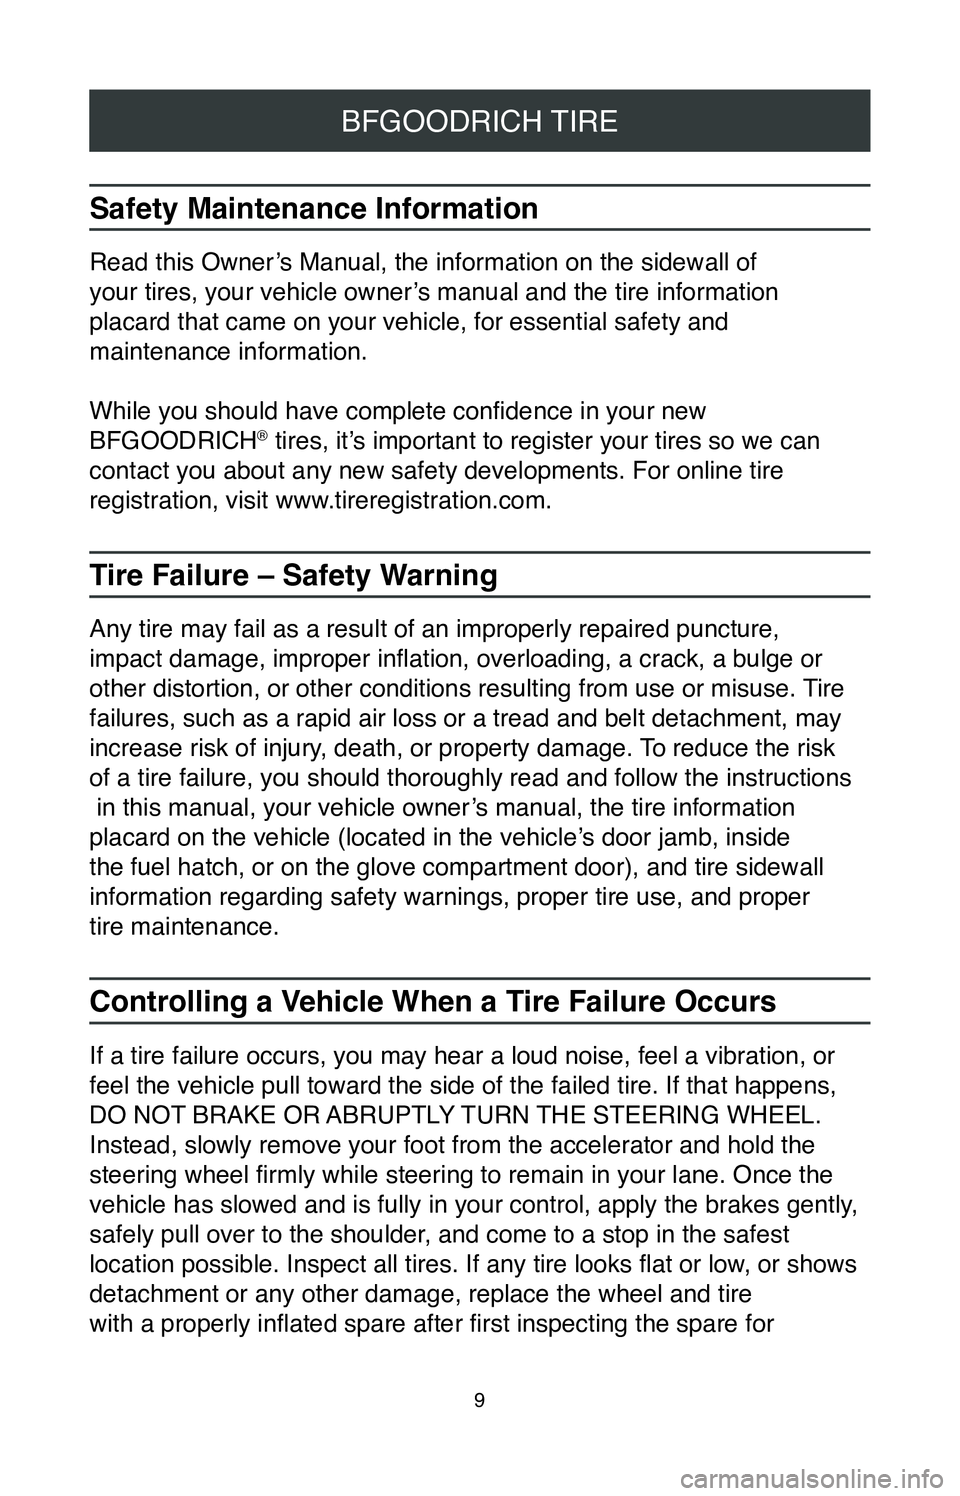 TOYOTA TUNDRA 2020  Warranties & Maintenance Guides (in English) 9
BFGOODRICH TIRE
Safety Maintenance Information
Read this Owner’s Manual, the information on the sidewall of  
your tires, your vehicle owner’s manual and the tire information   
placard that cam